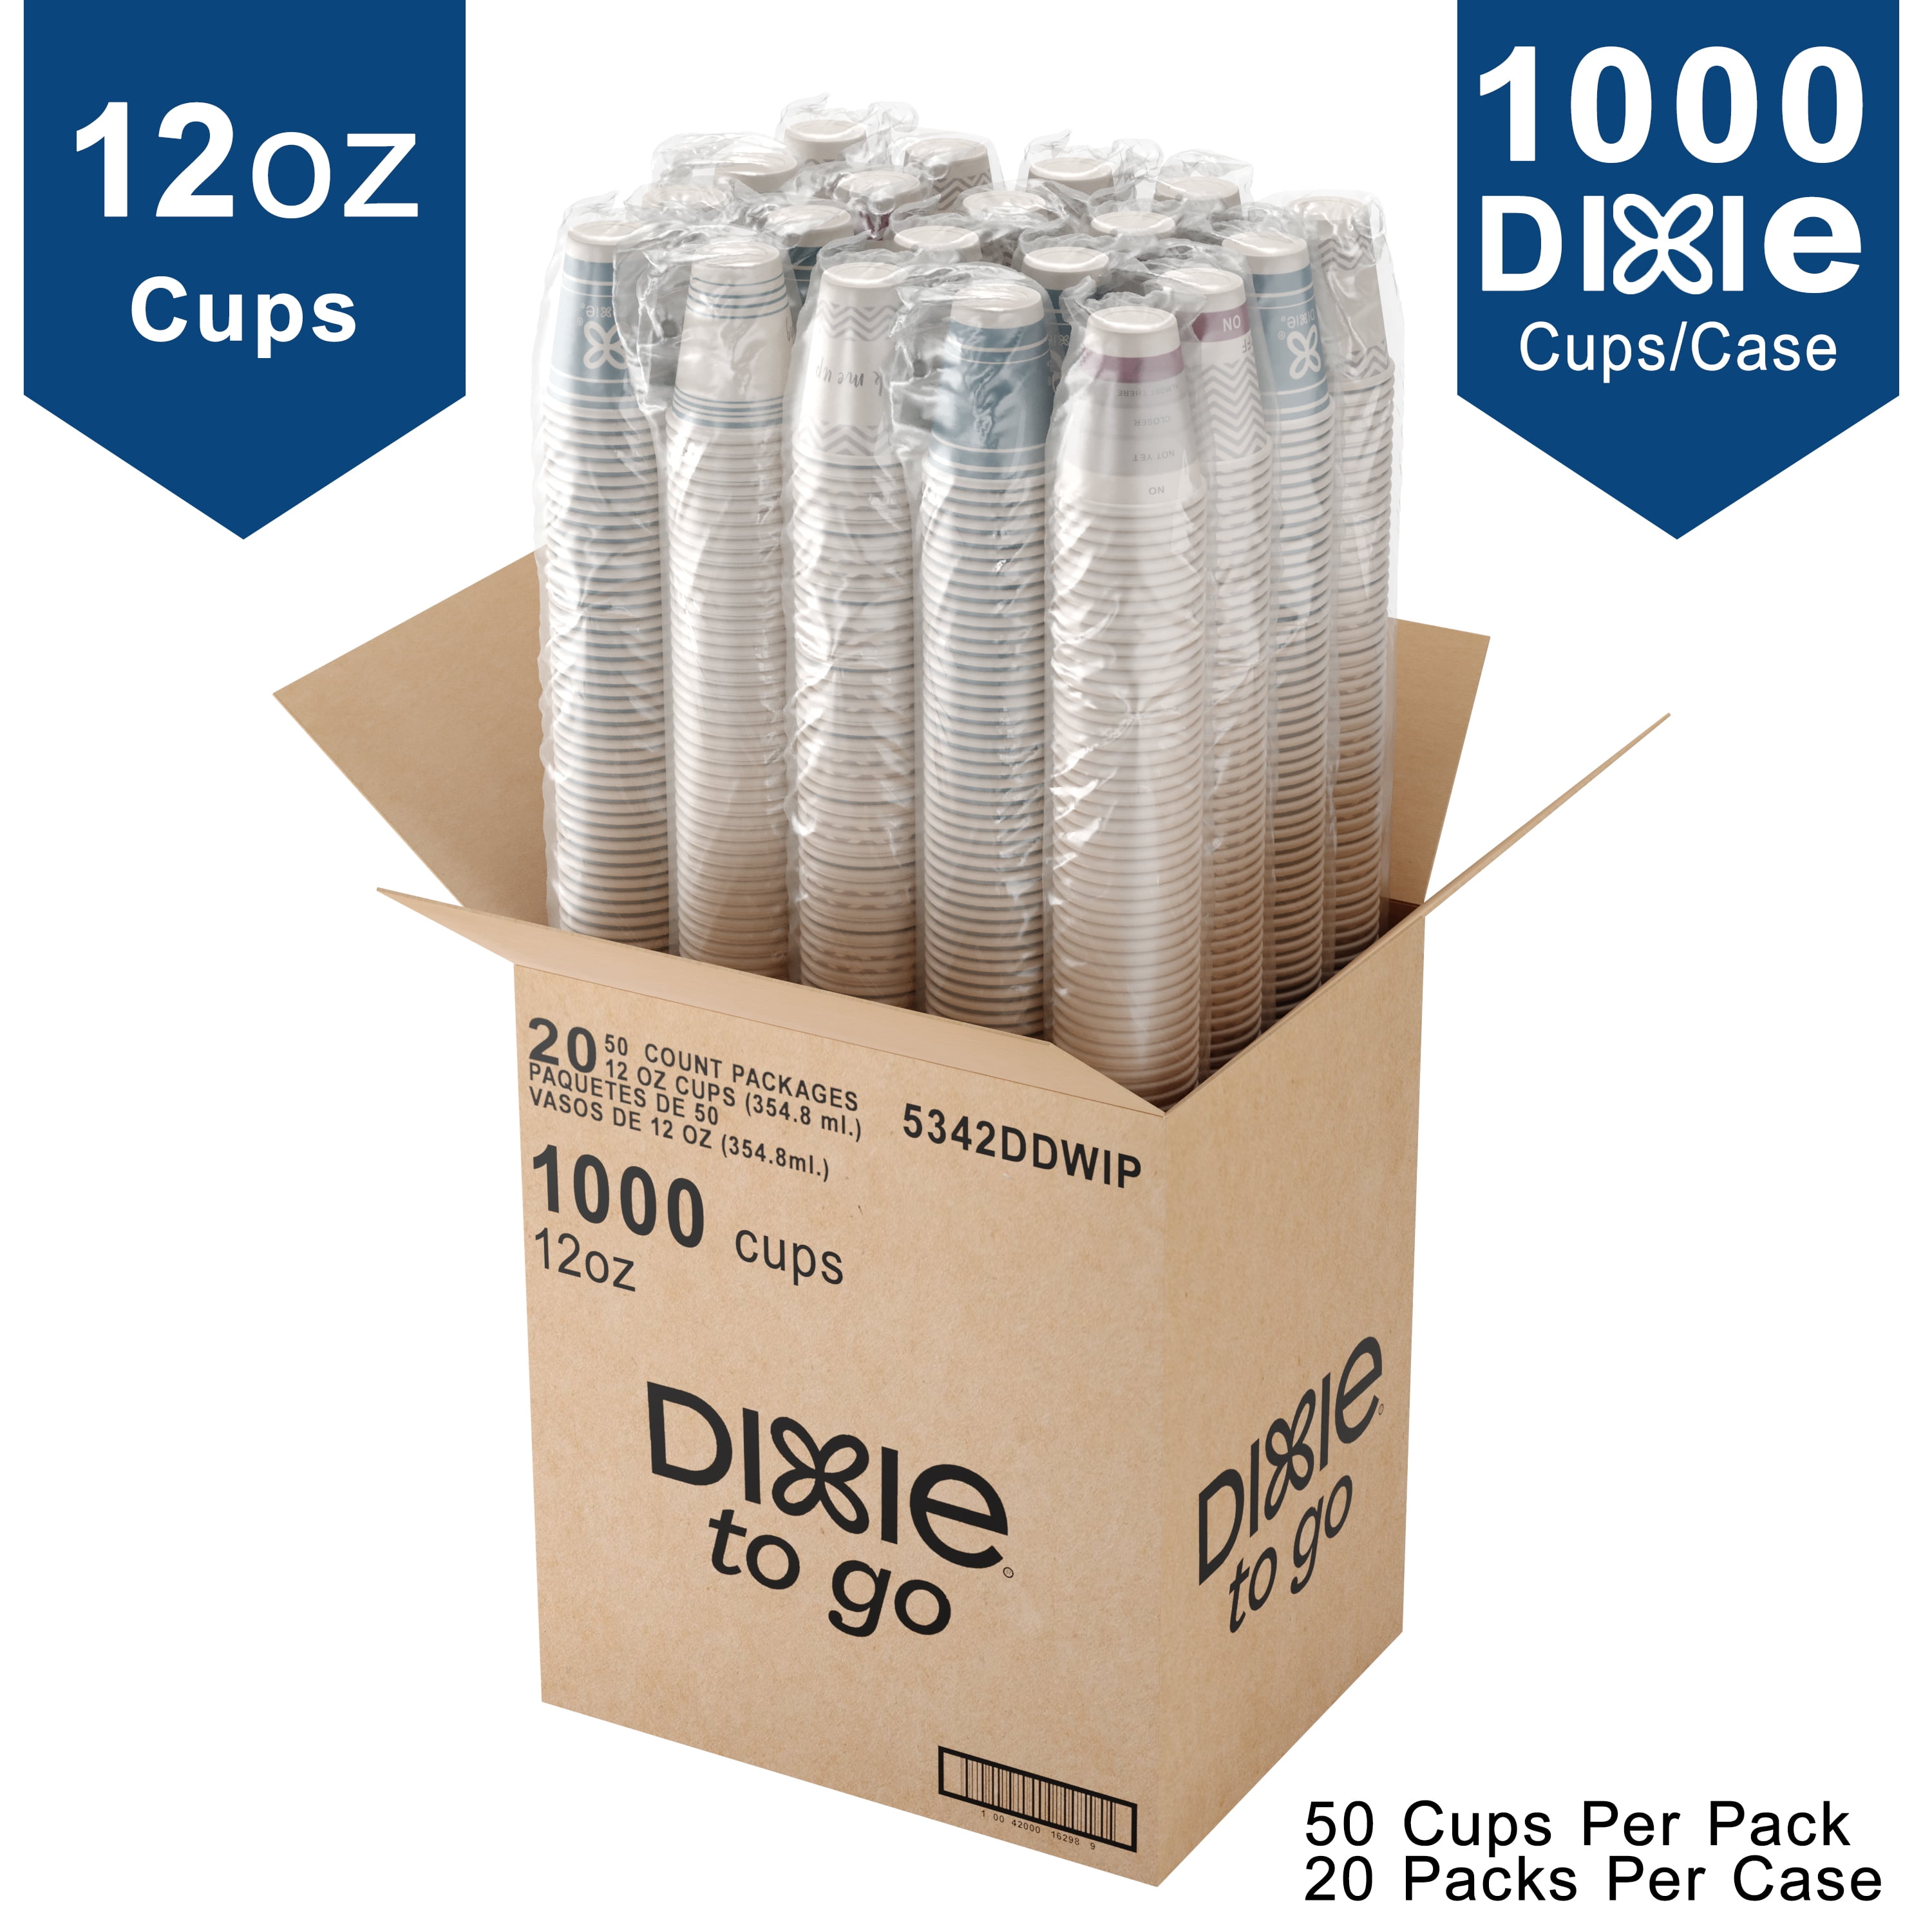 42,000+ Dixie Cup Pictures